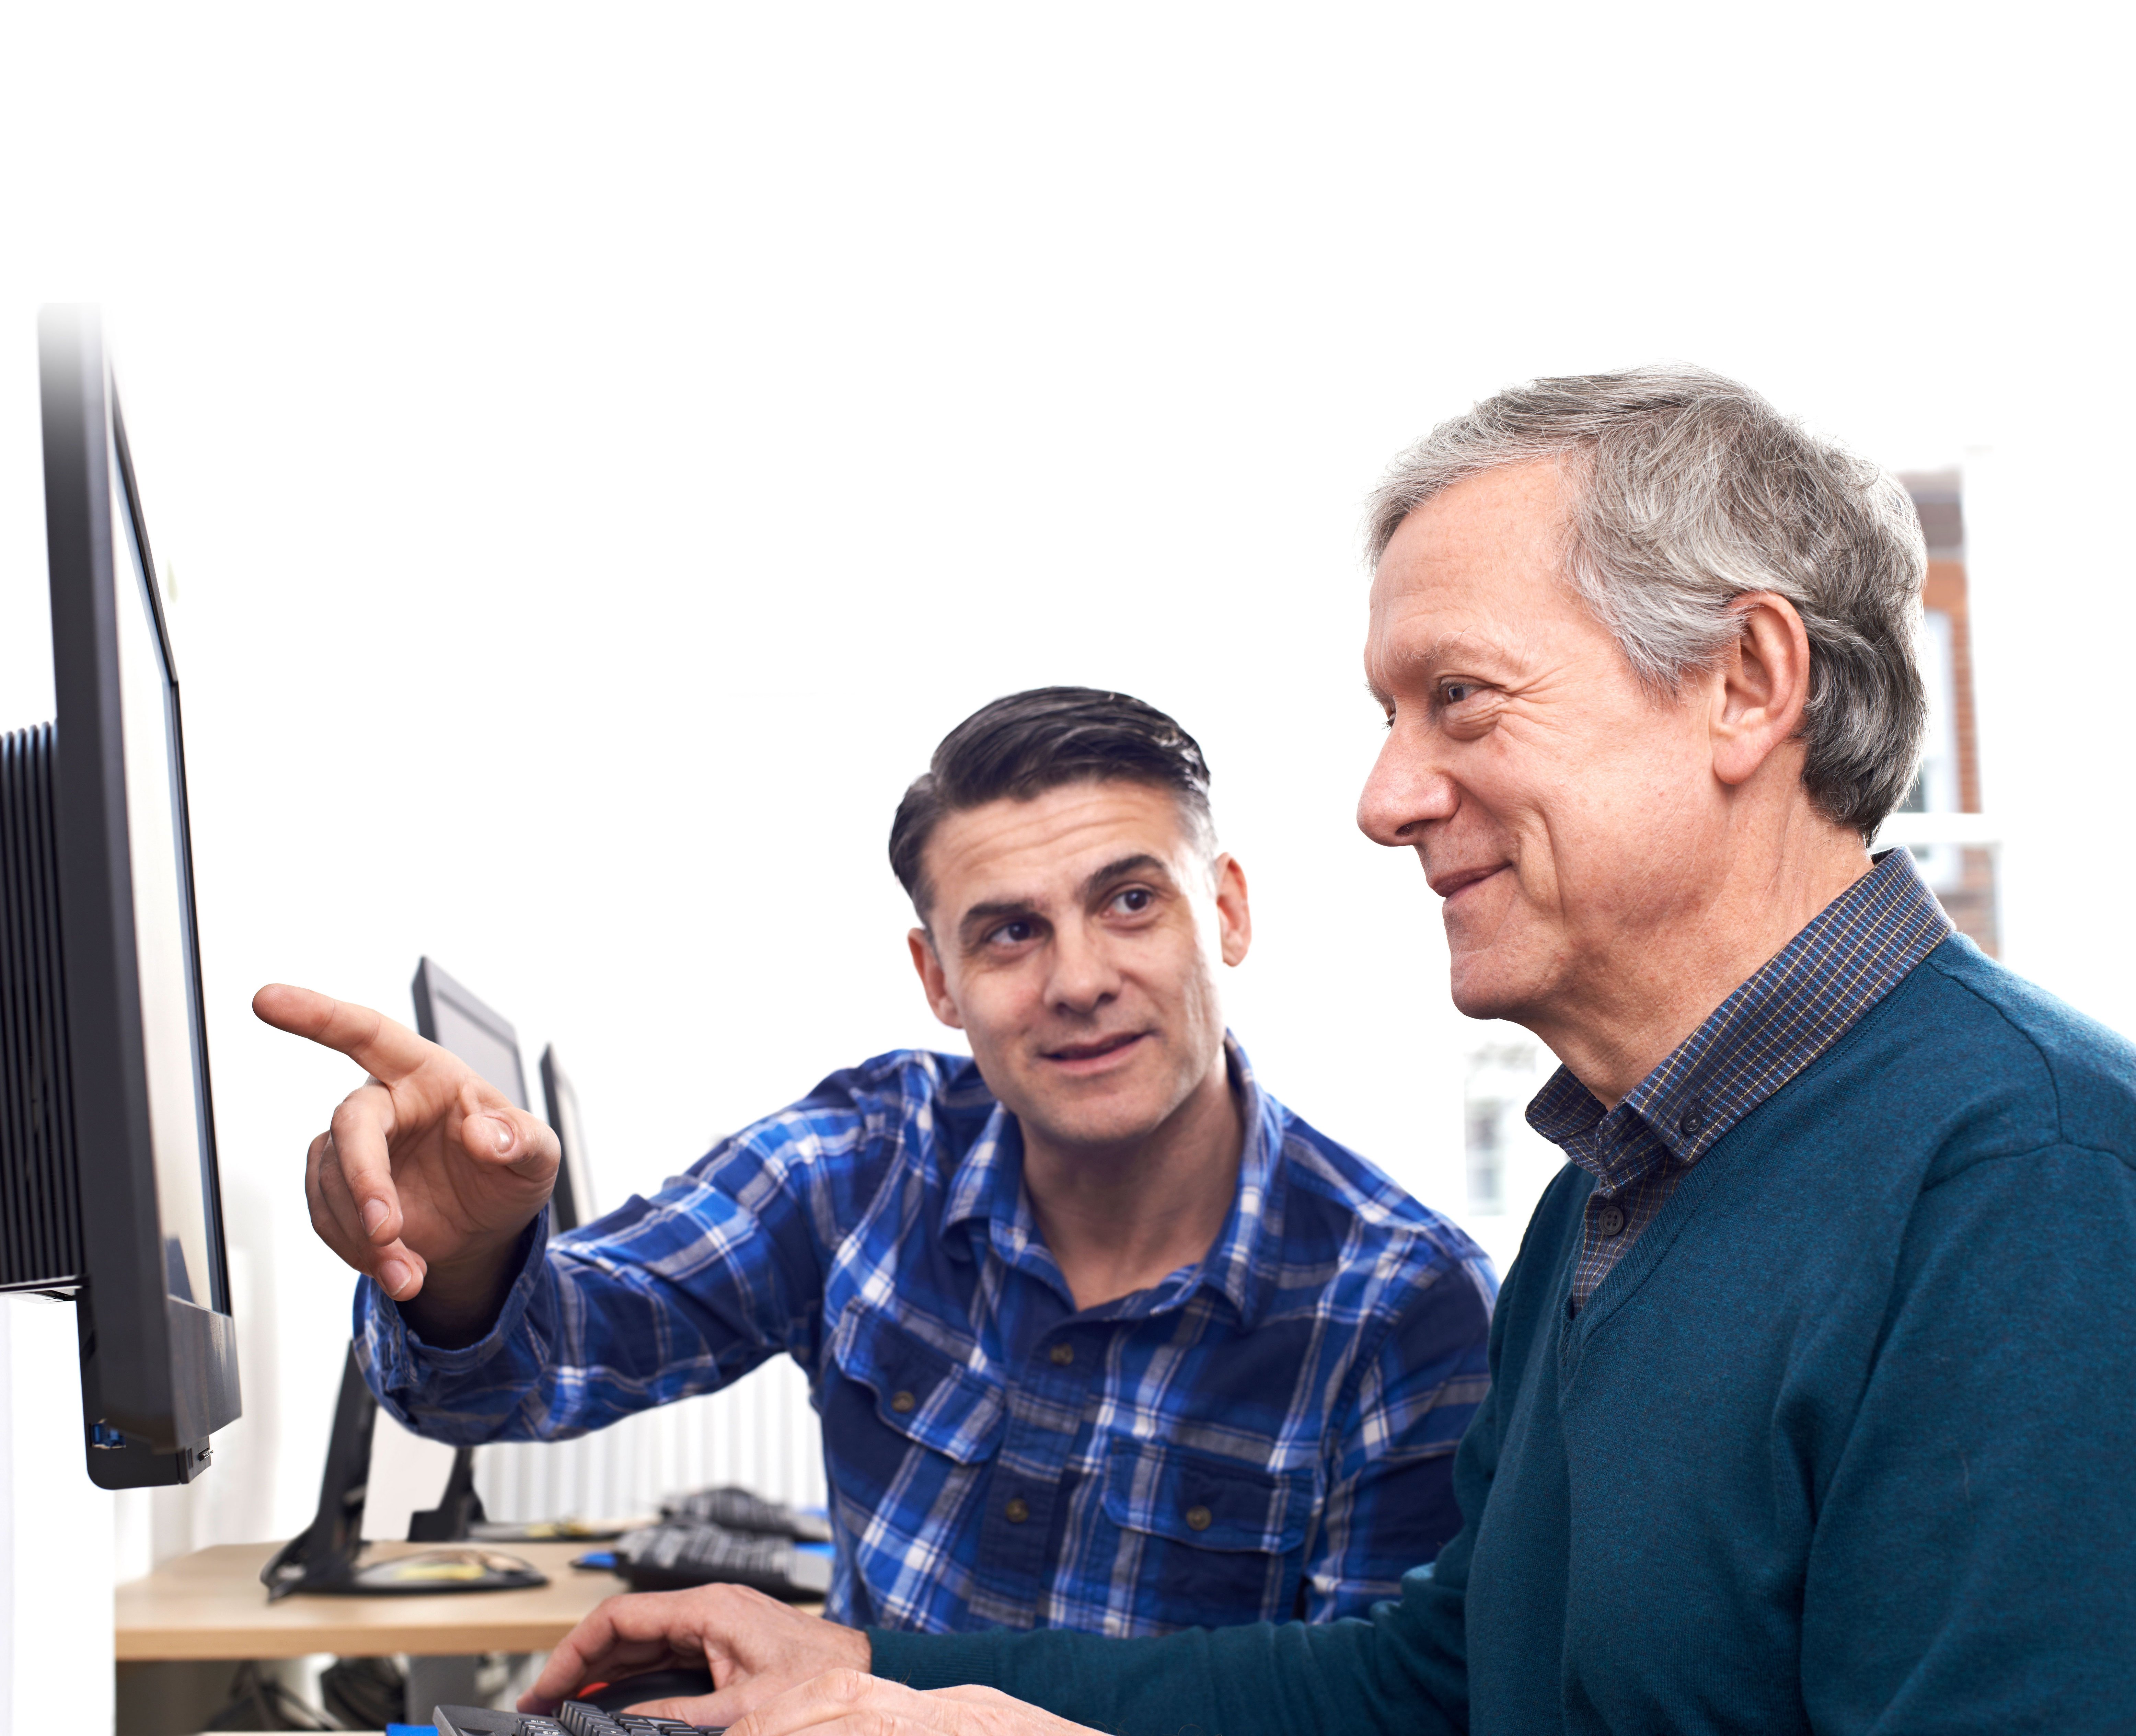 What to Expect from Online Adult Education